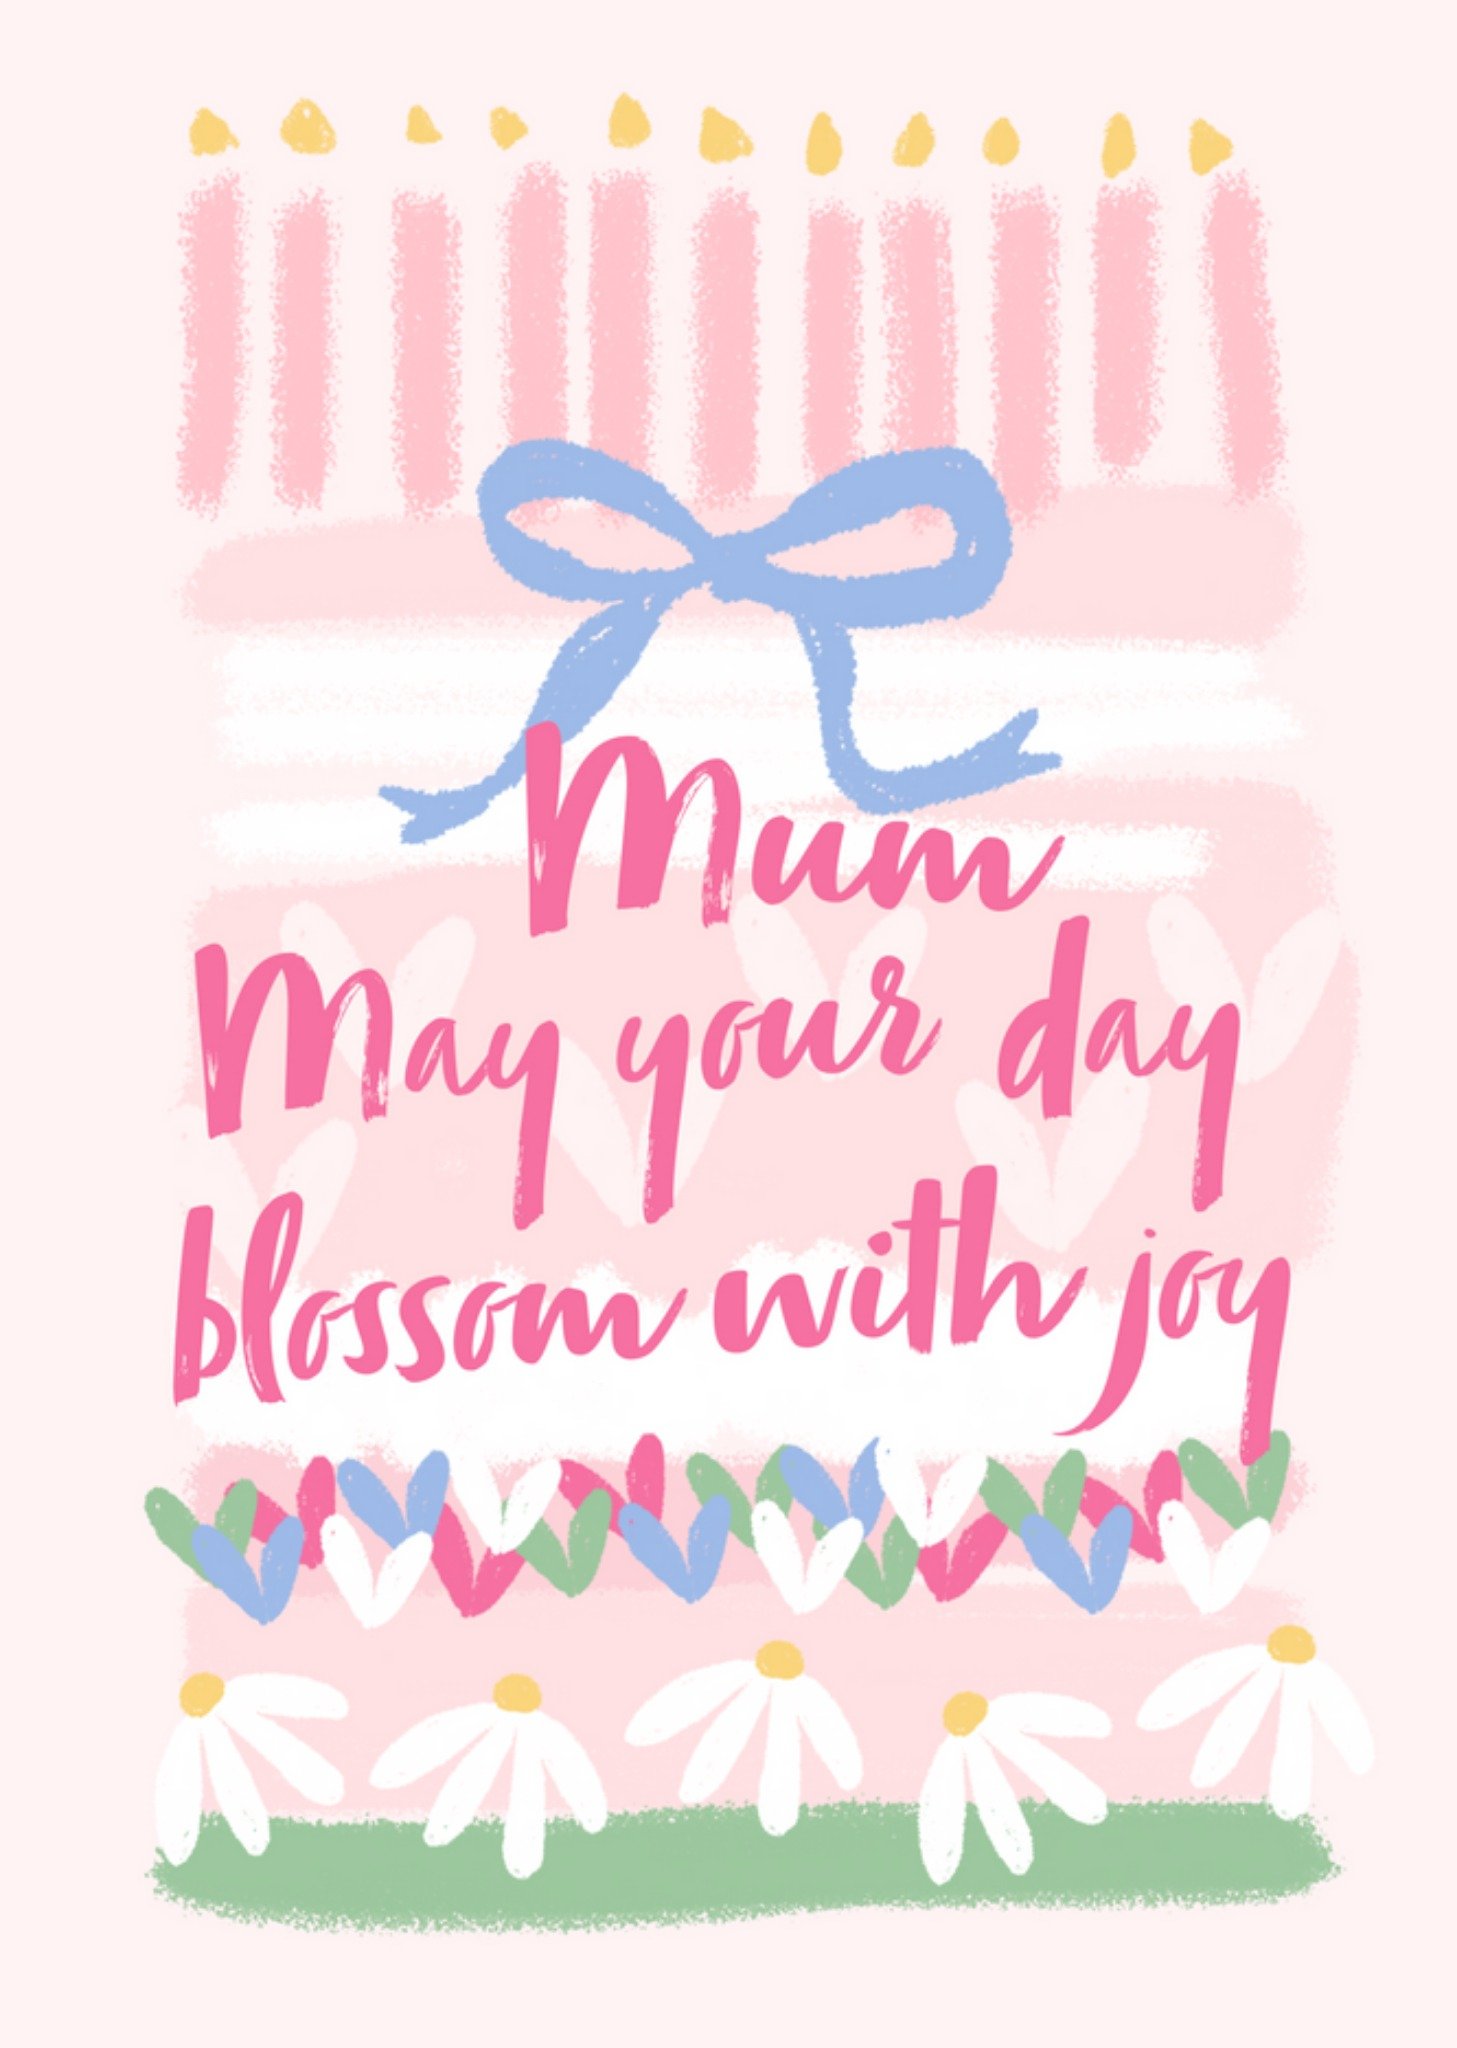 Moonpig Mum May Your Day Blossom With Joy Illustrated Floral Birthday Cake Birthday Card Ecard